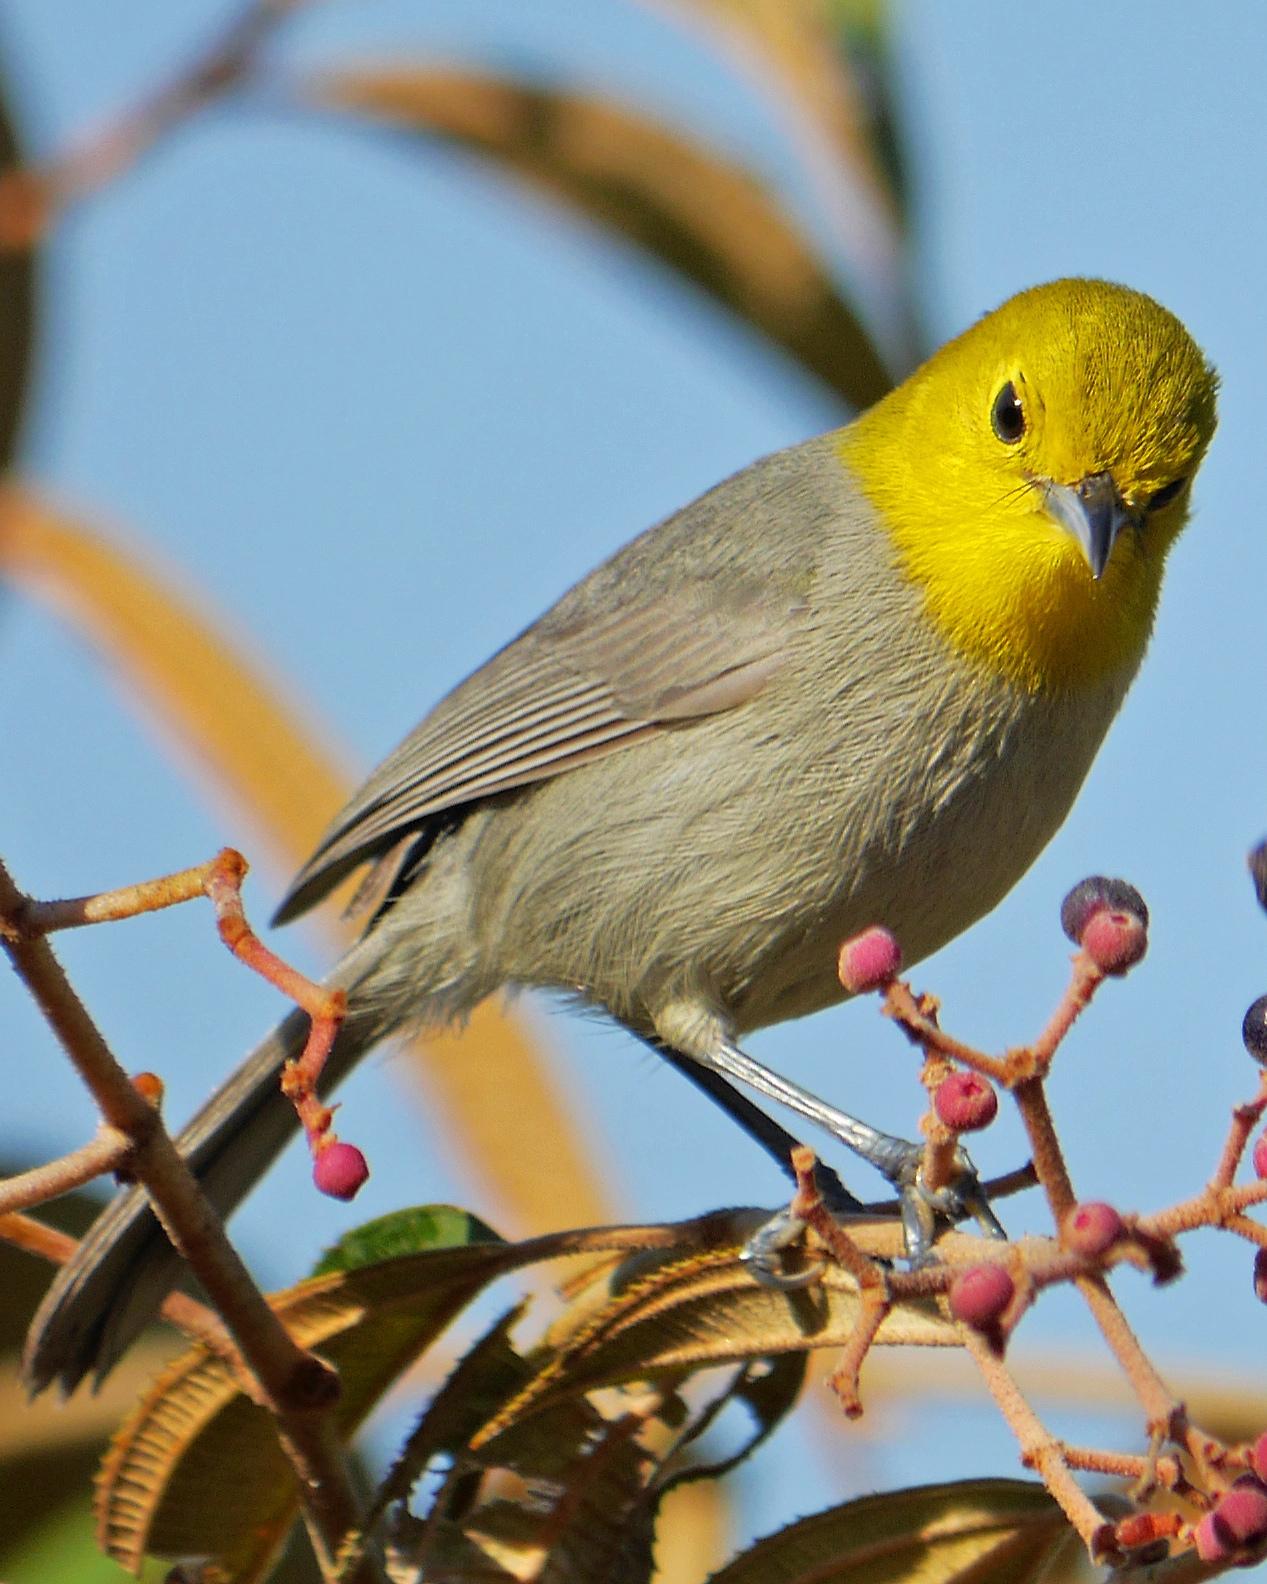 Yellow-headed Warbler Photo by Ollie Oliver